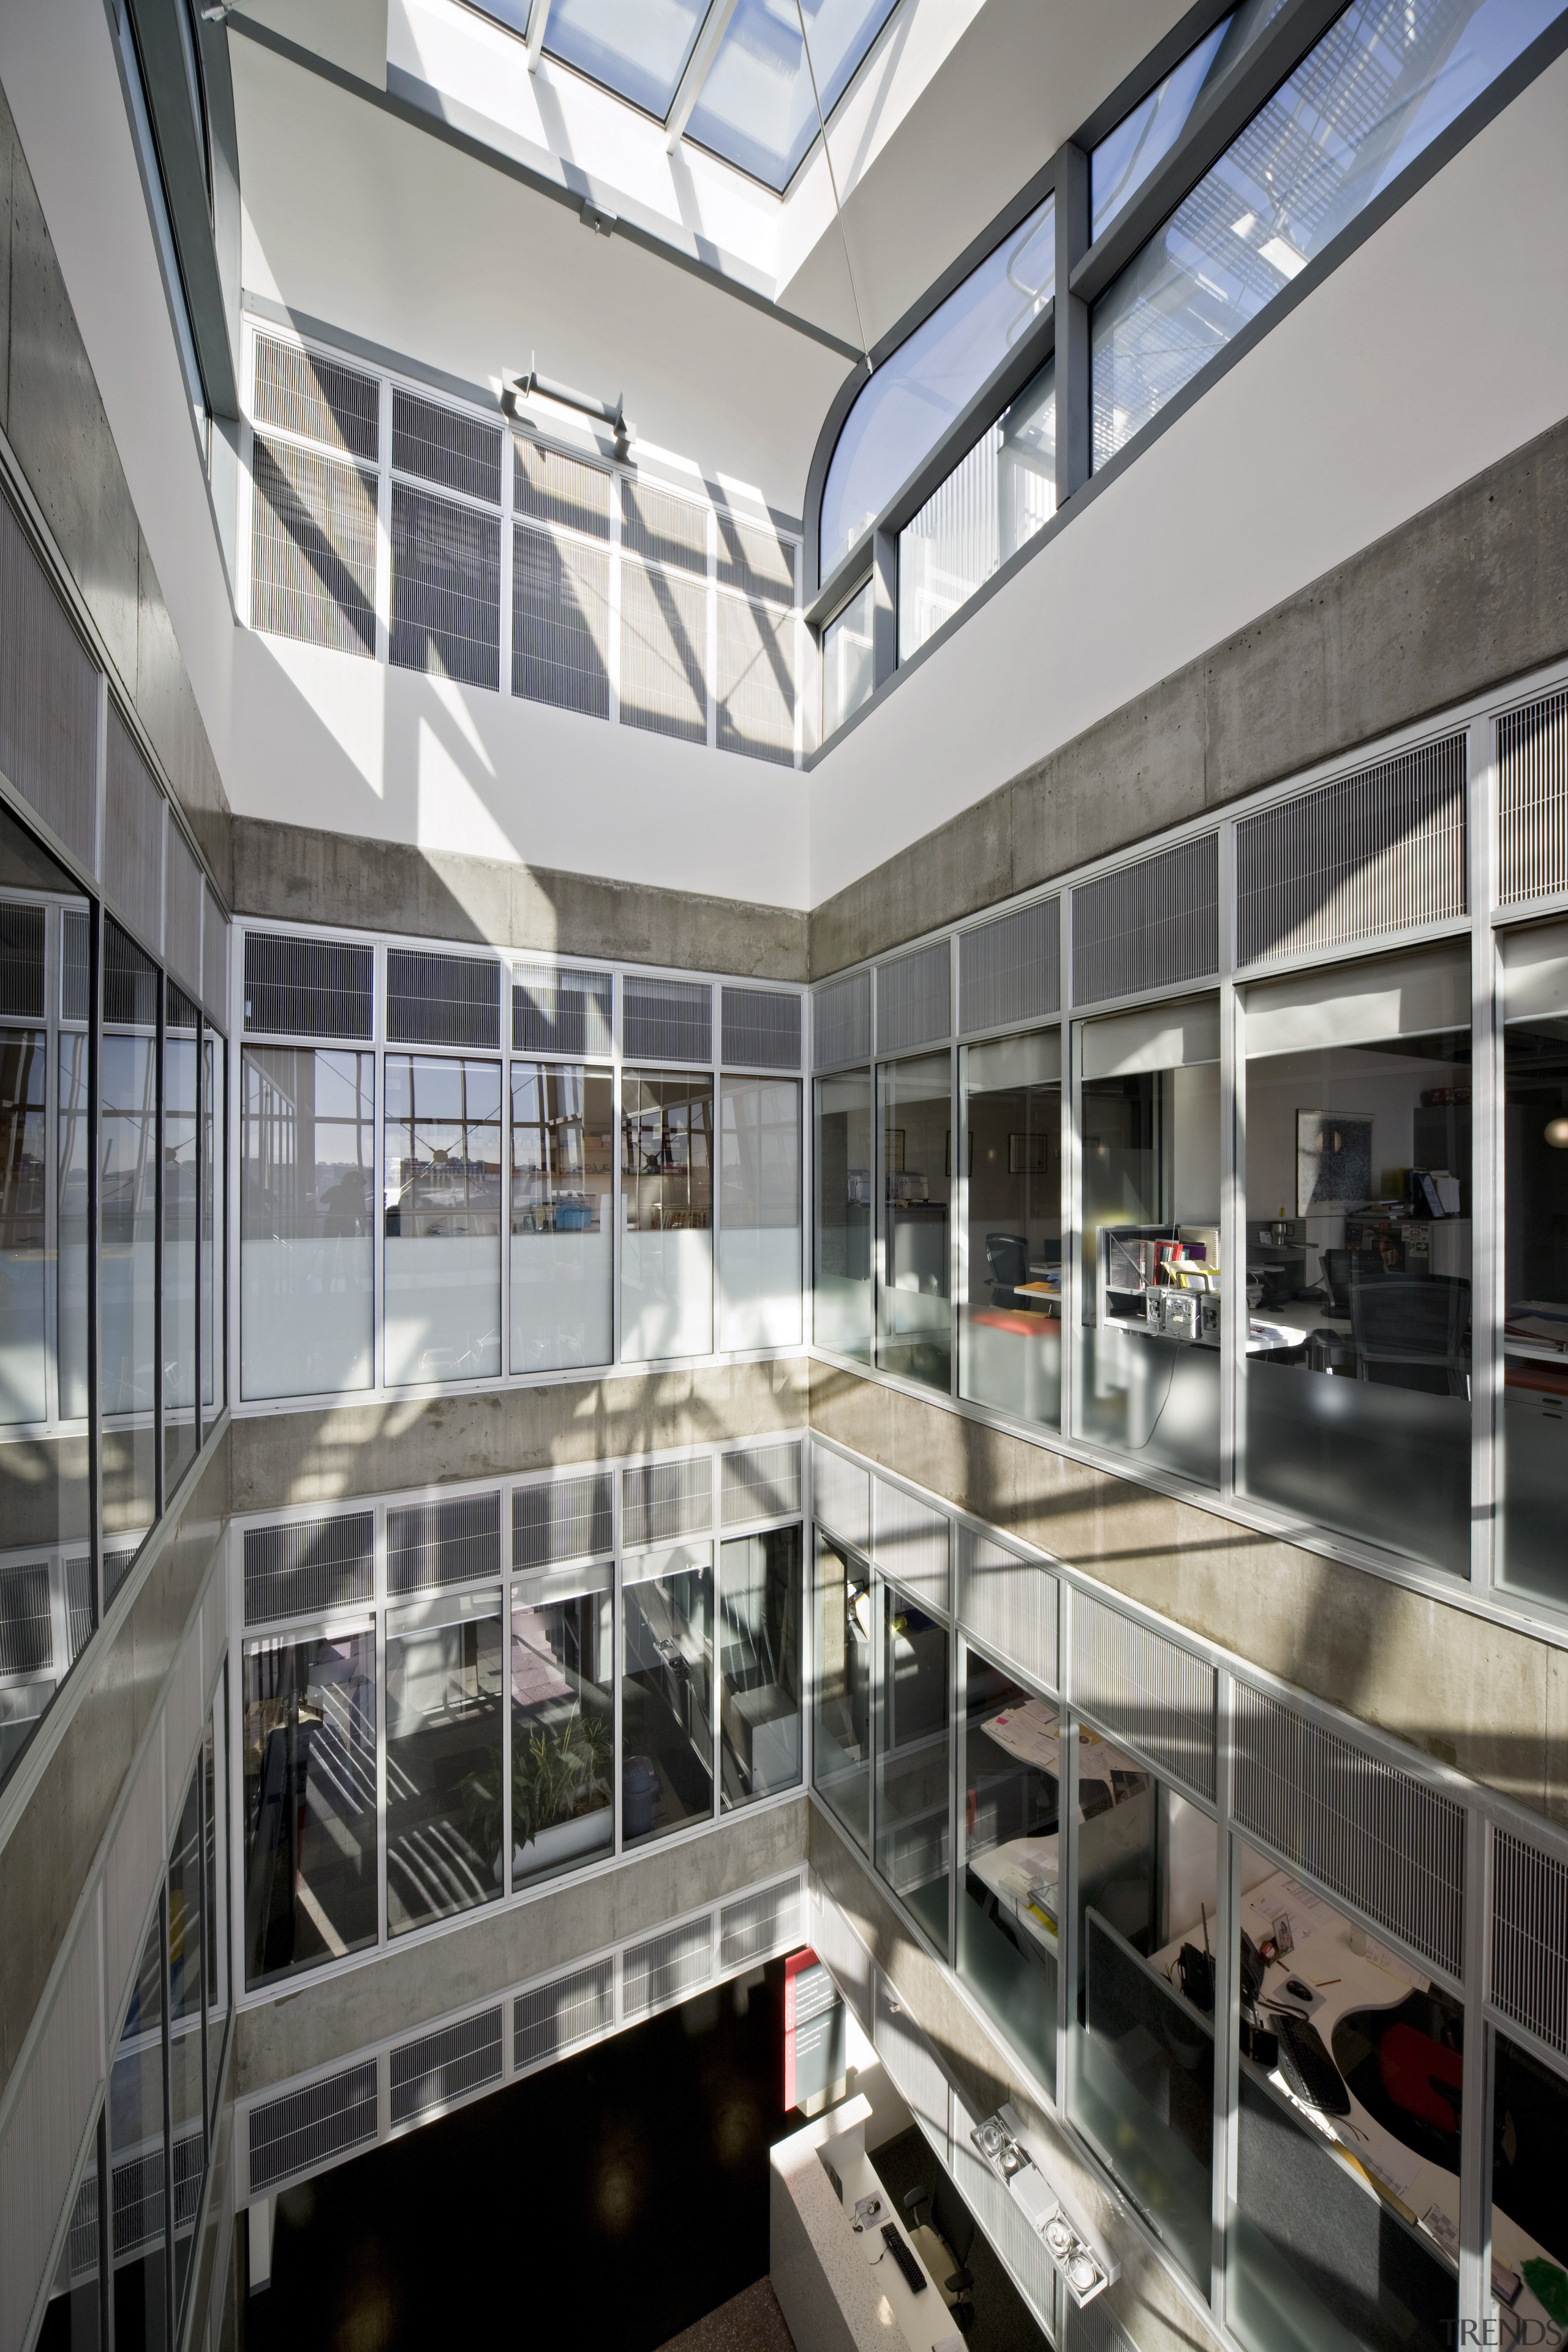 Internal glazing creates a transparency within the building, apartment, architecture, building, corporate headquarters, daylighting, headquarters, metropolitan area, mixed use, gray, black